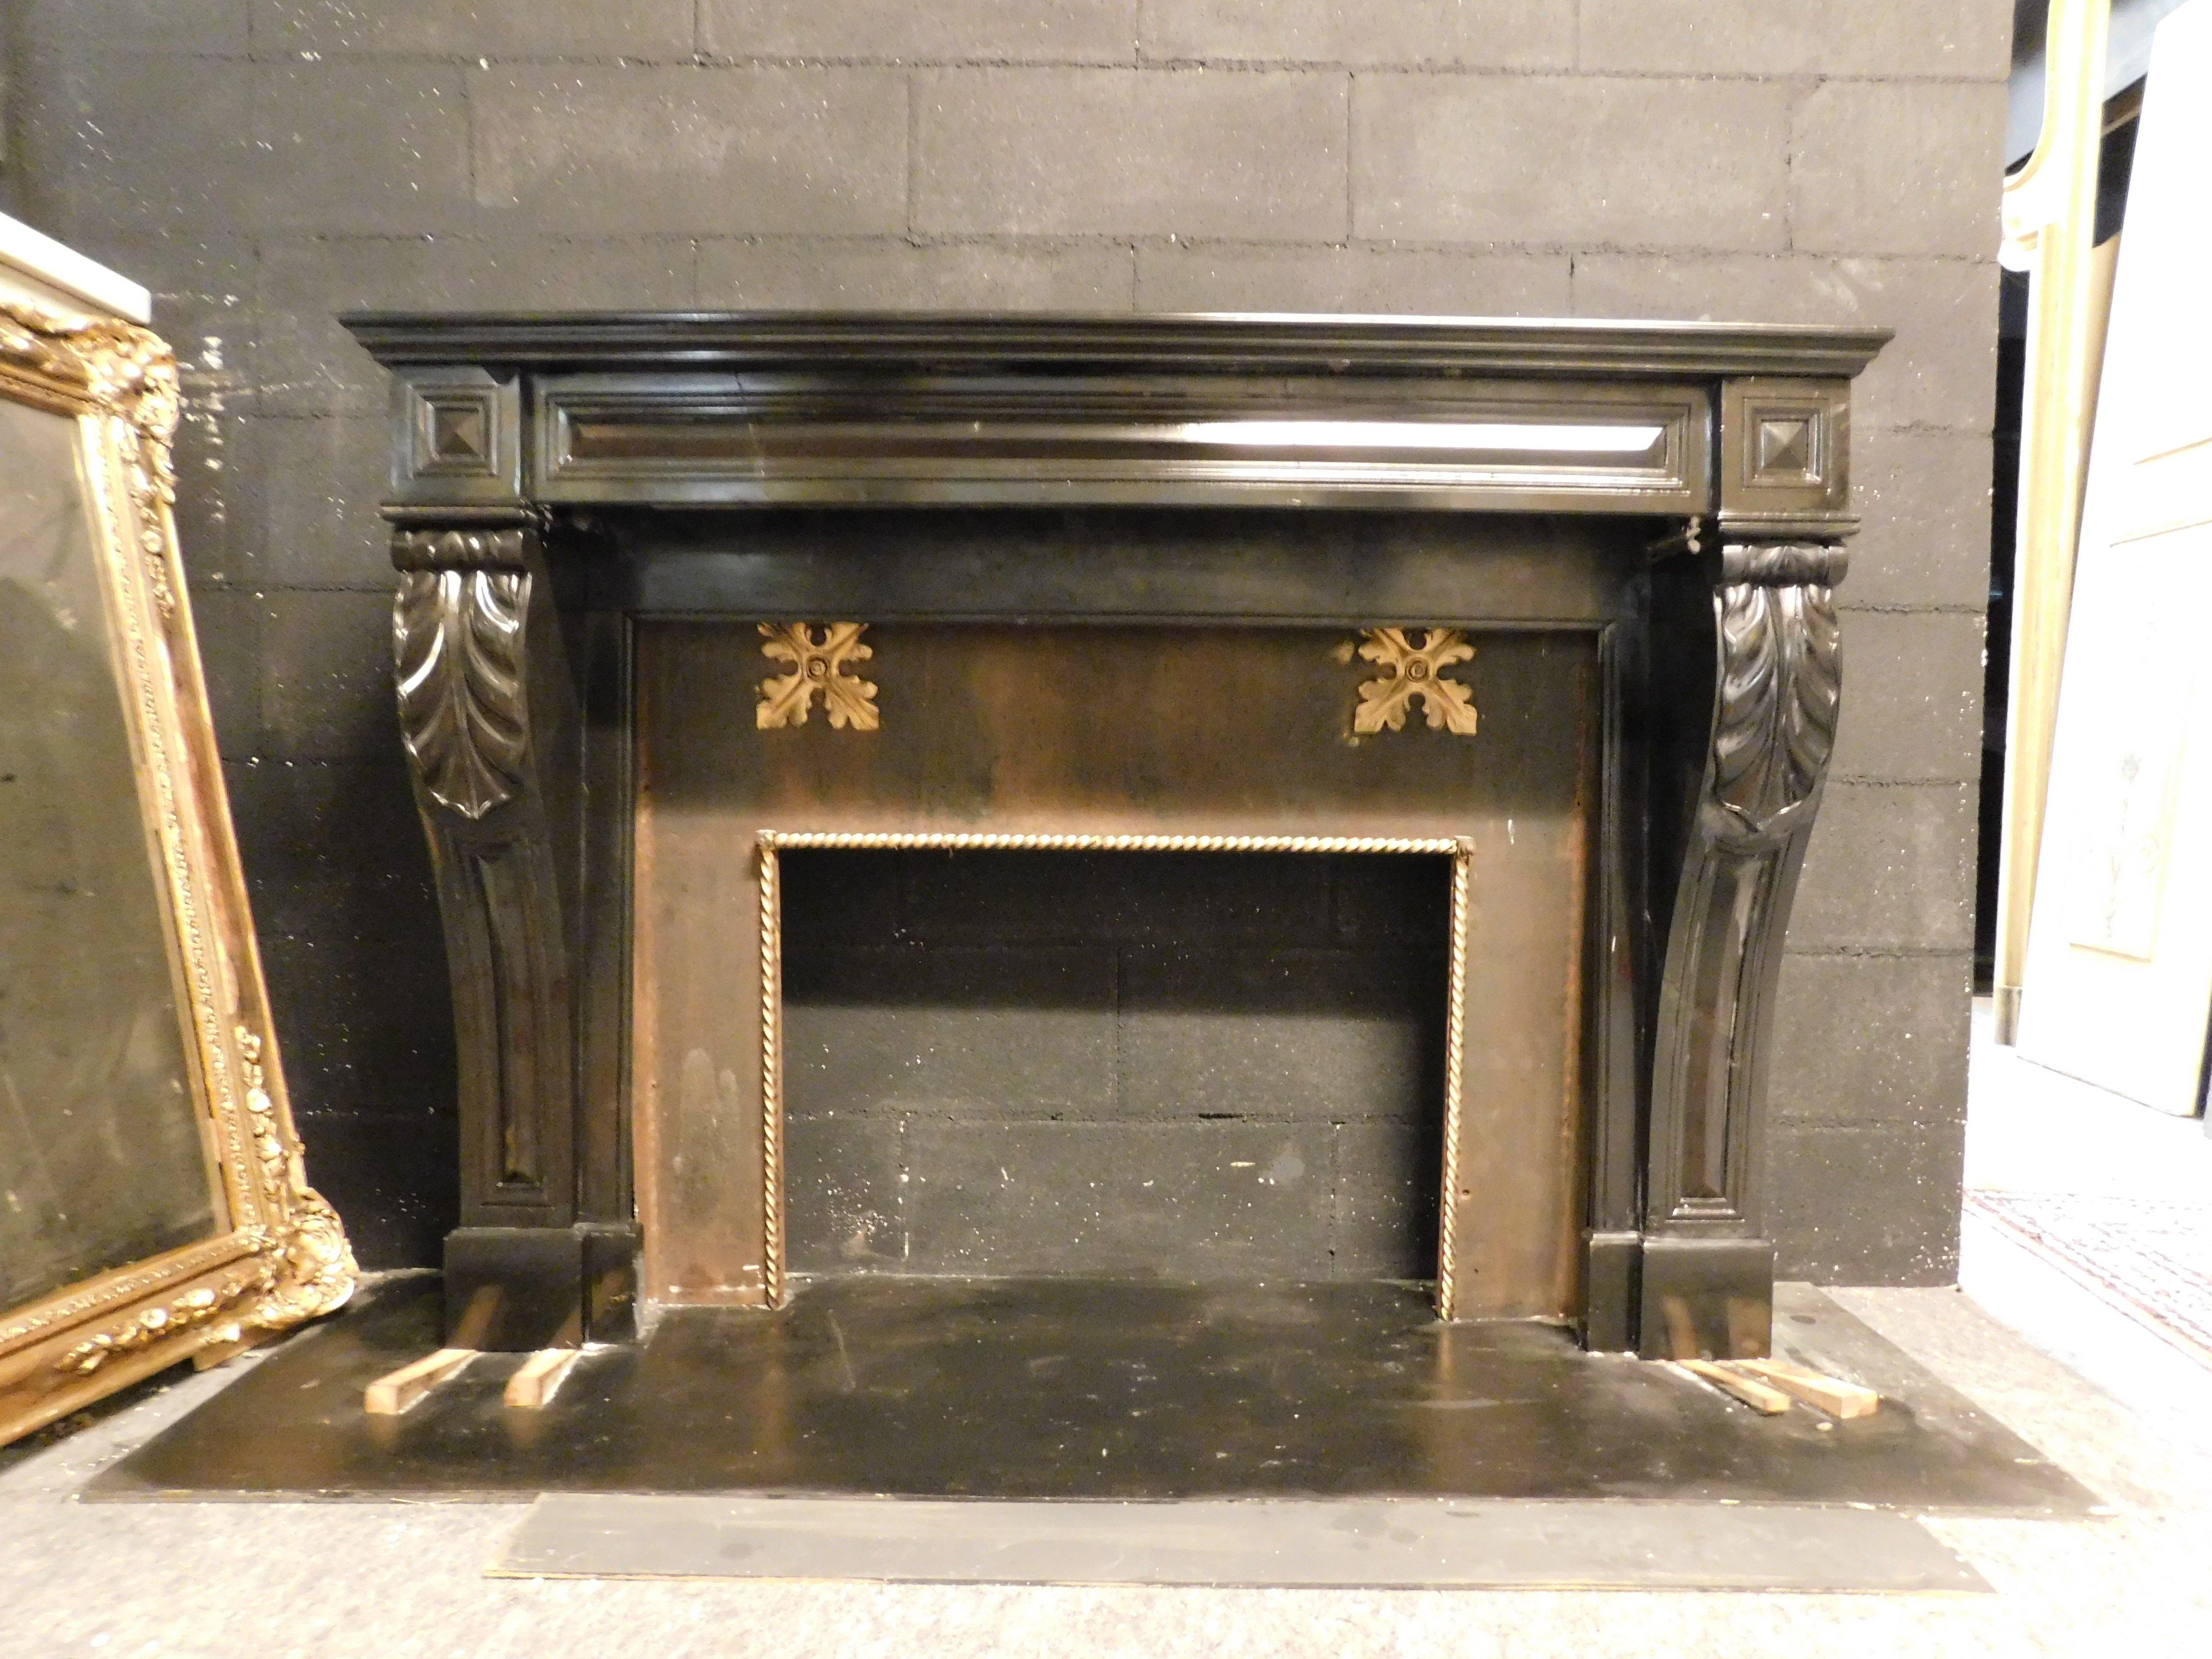 Ancient fireplace in hand-sculpted black marble with acanthus leaves and geometric decorations, built in the 19th century, for a palace in Italy.
It has some breaks, as shown in the photos, but not evident and which are part of the fireplace's